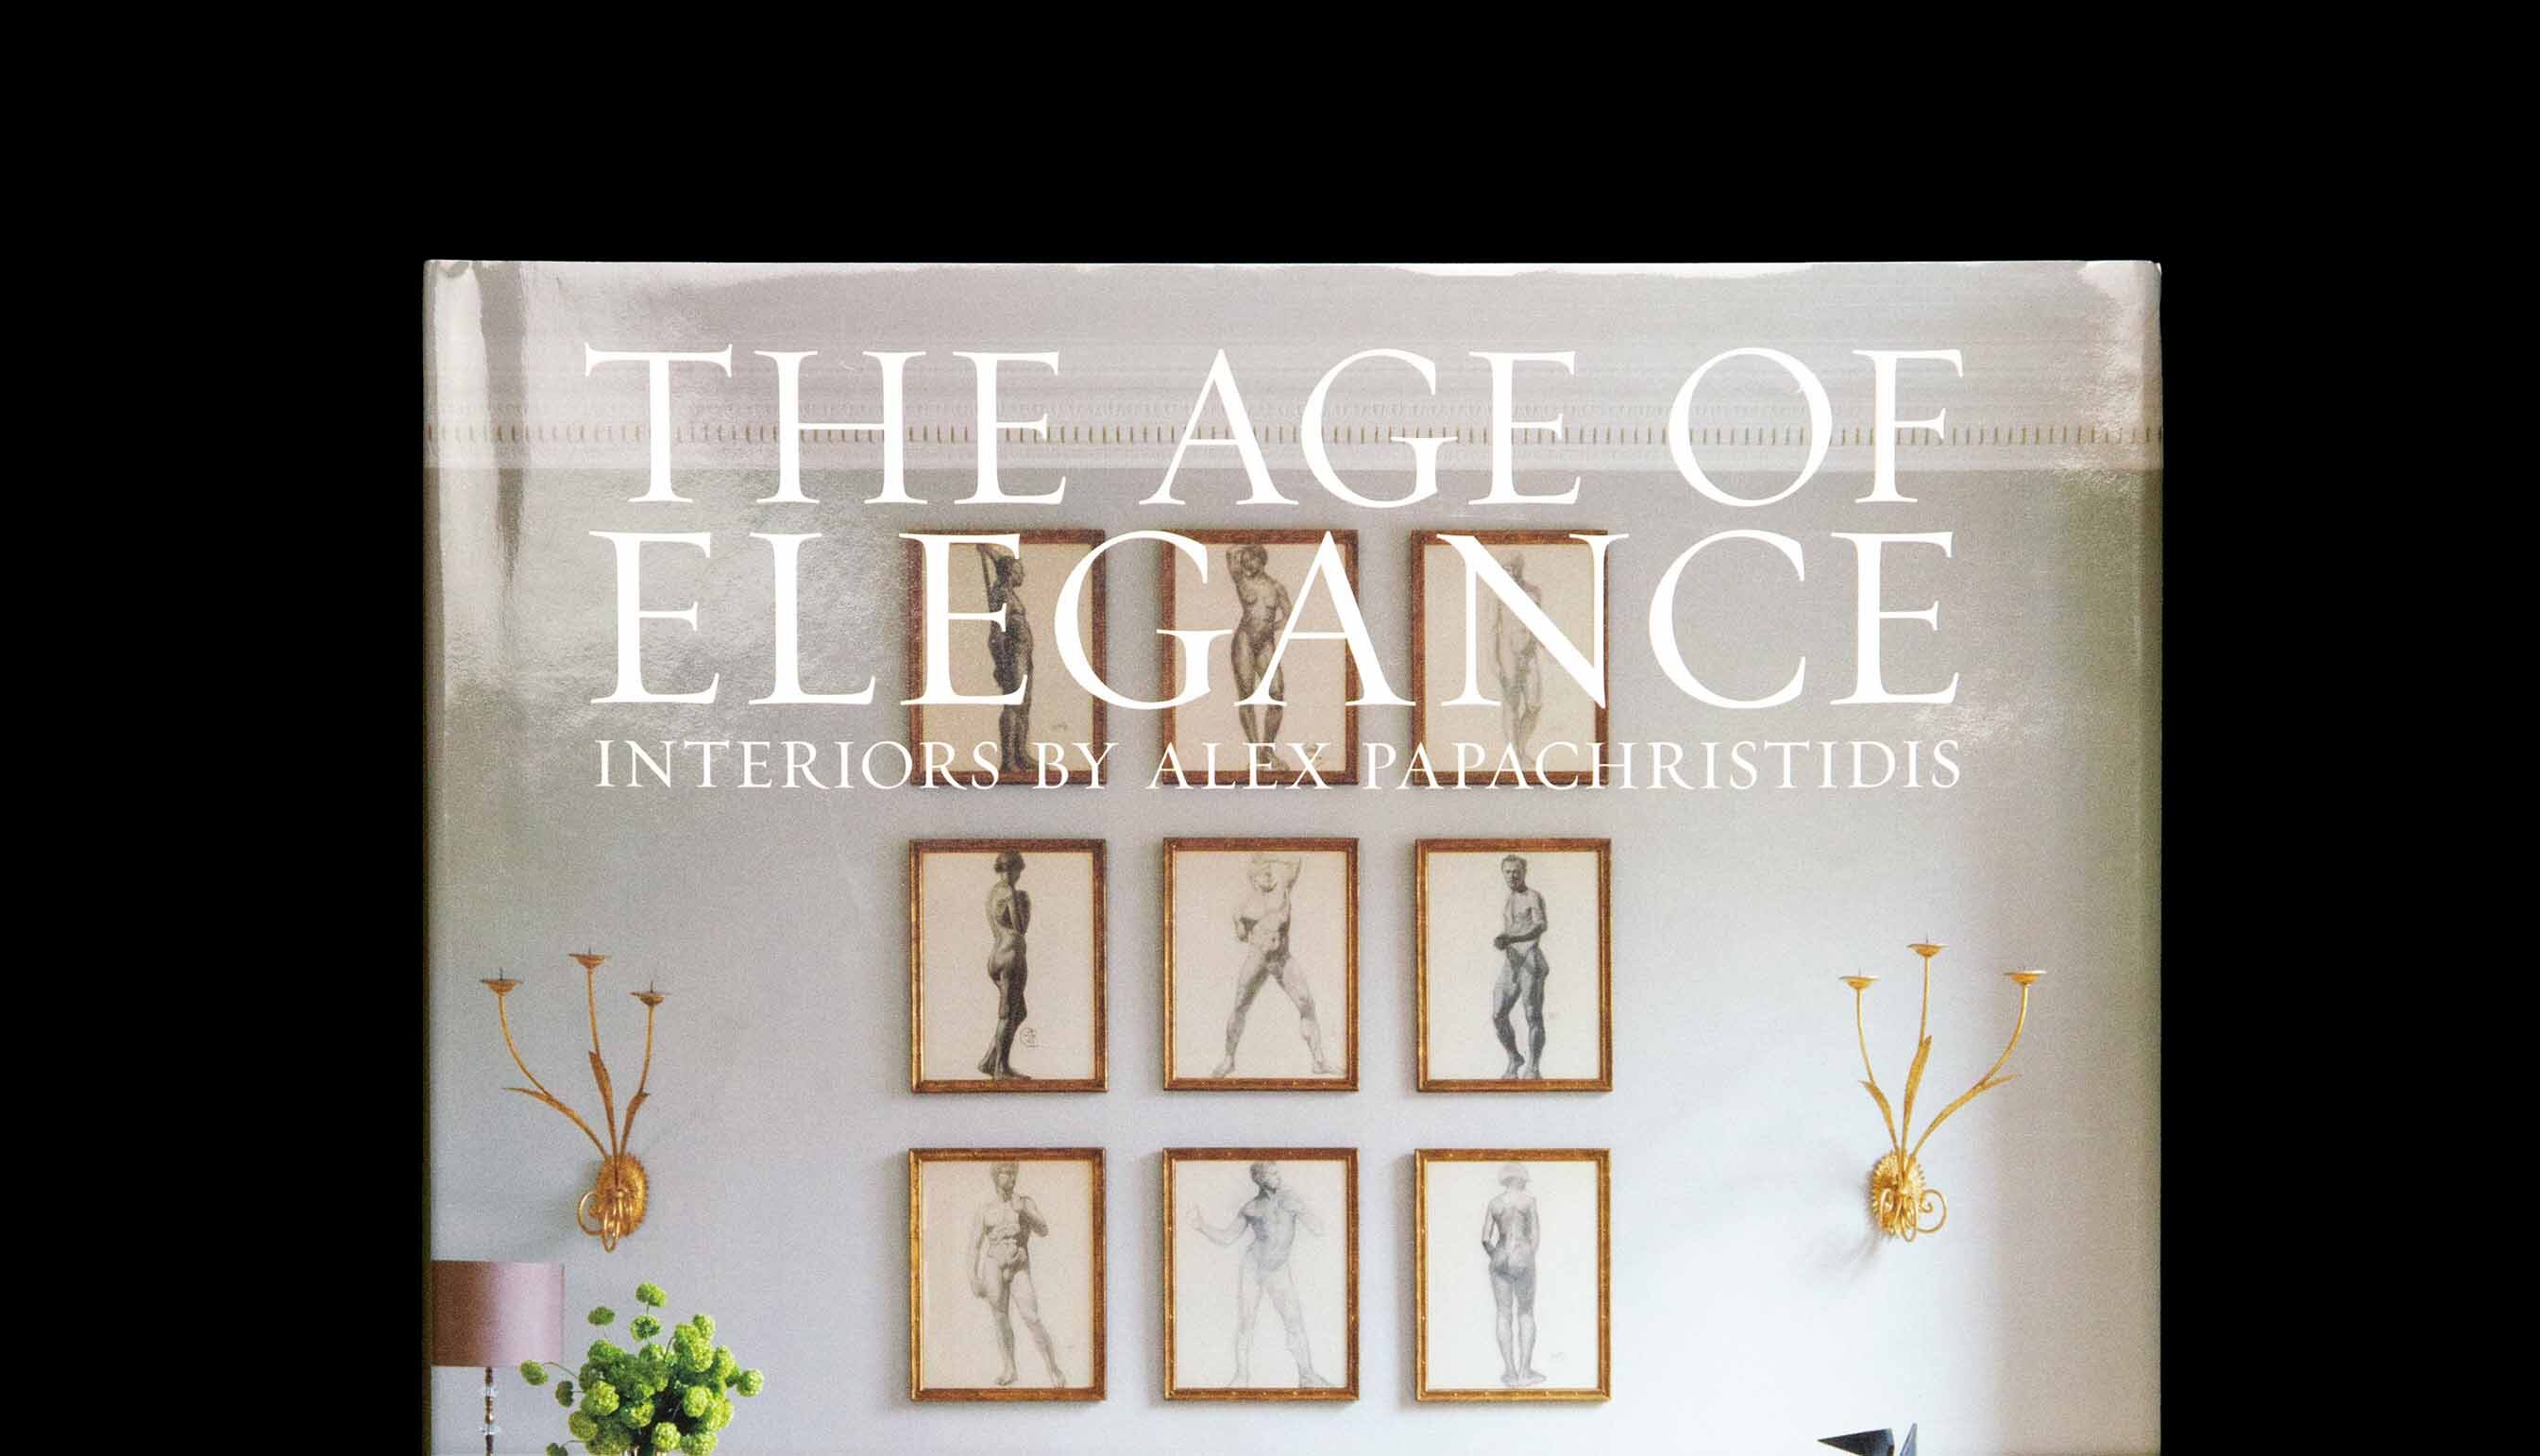 The Age of Elegance: Interiors by Alex Papachristidis